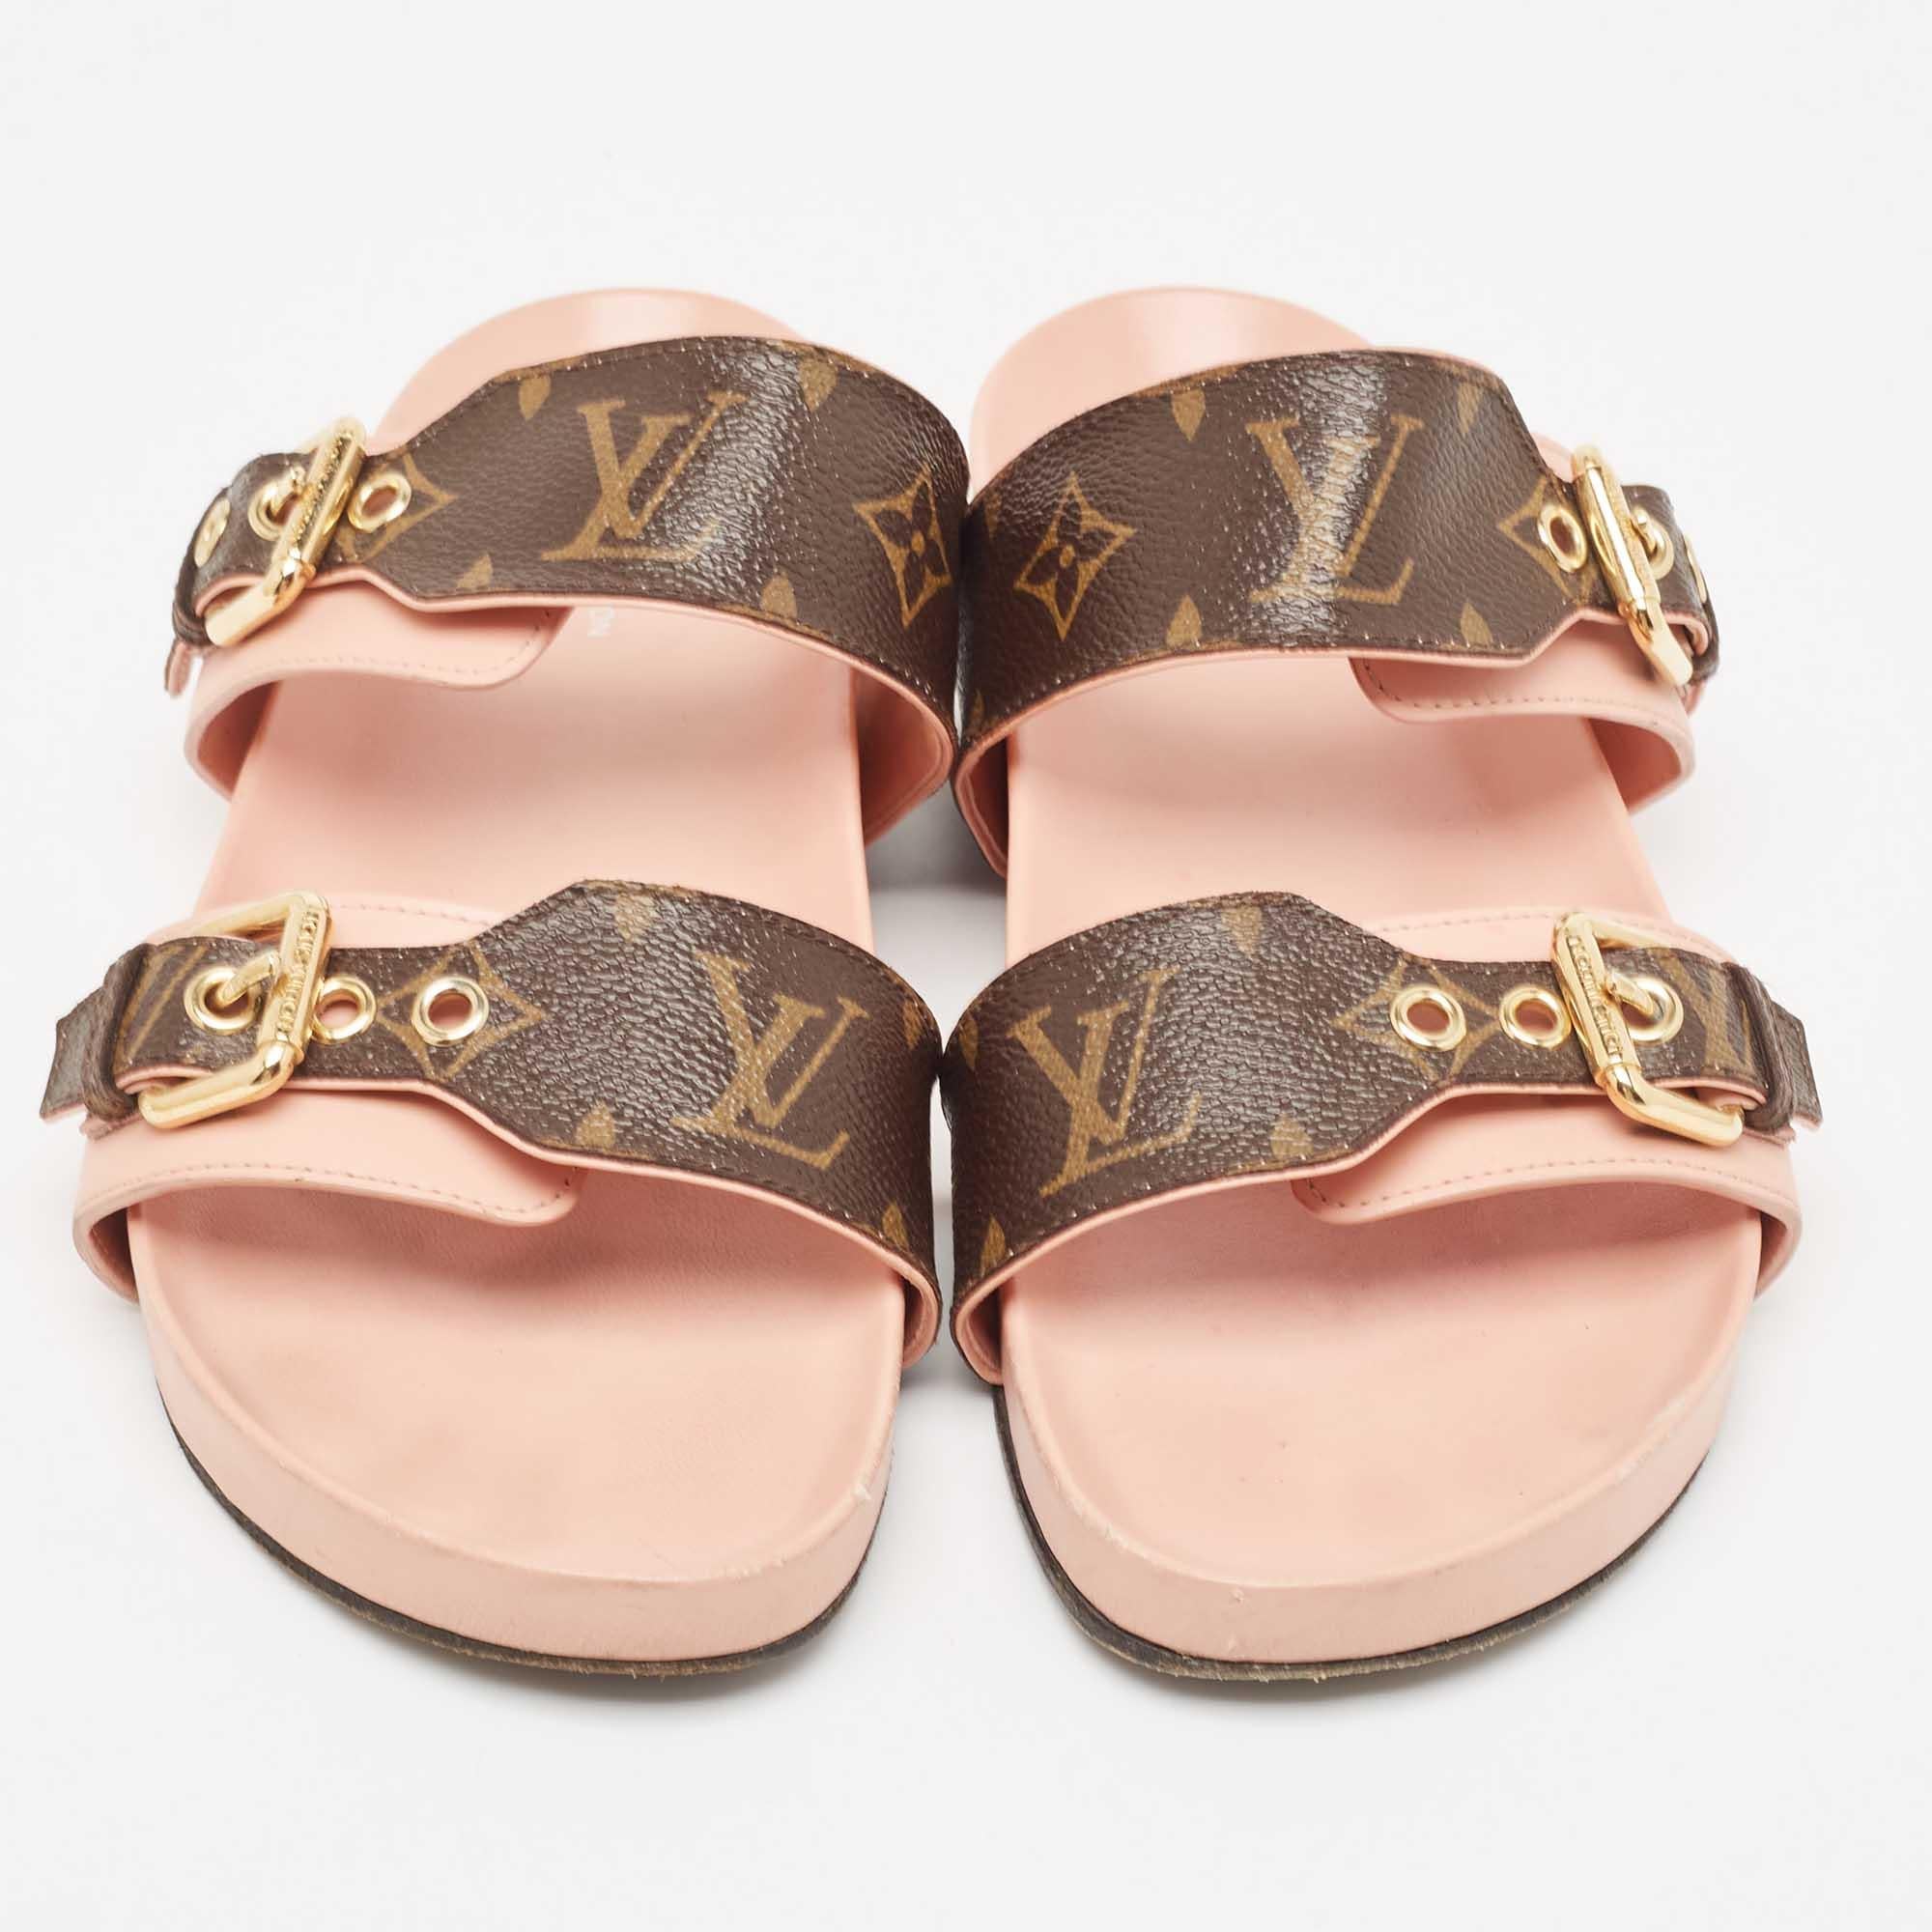 Comfort and fashion become best pals with these fabulous flat slides! The pink/brown slides from Louis Vuitton are crafted from Monogram canvas into an open-toe silhouette. They have two buckled straps and rubber soles.

Includes
Original Dustbag